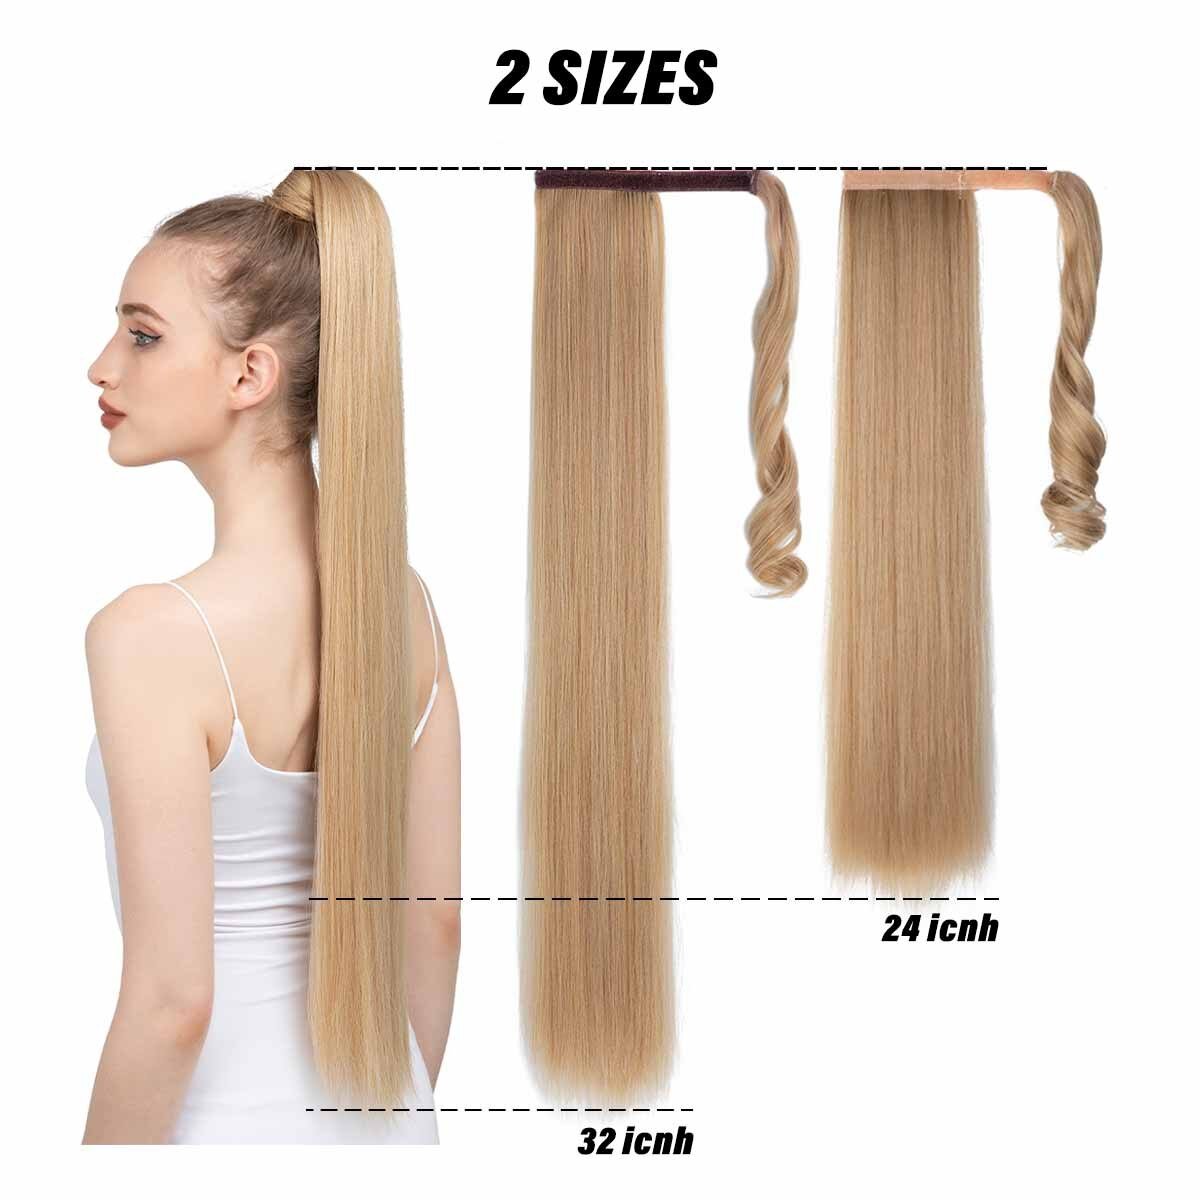 Secret Hair Straight Ponytail Extensions - BEAUTY BELLO®